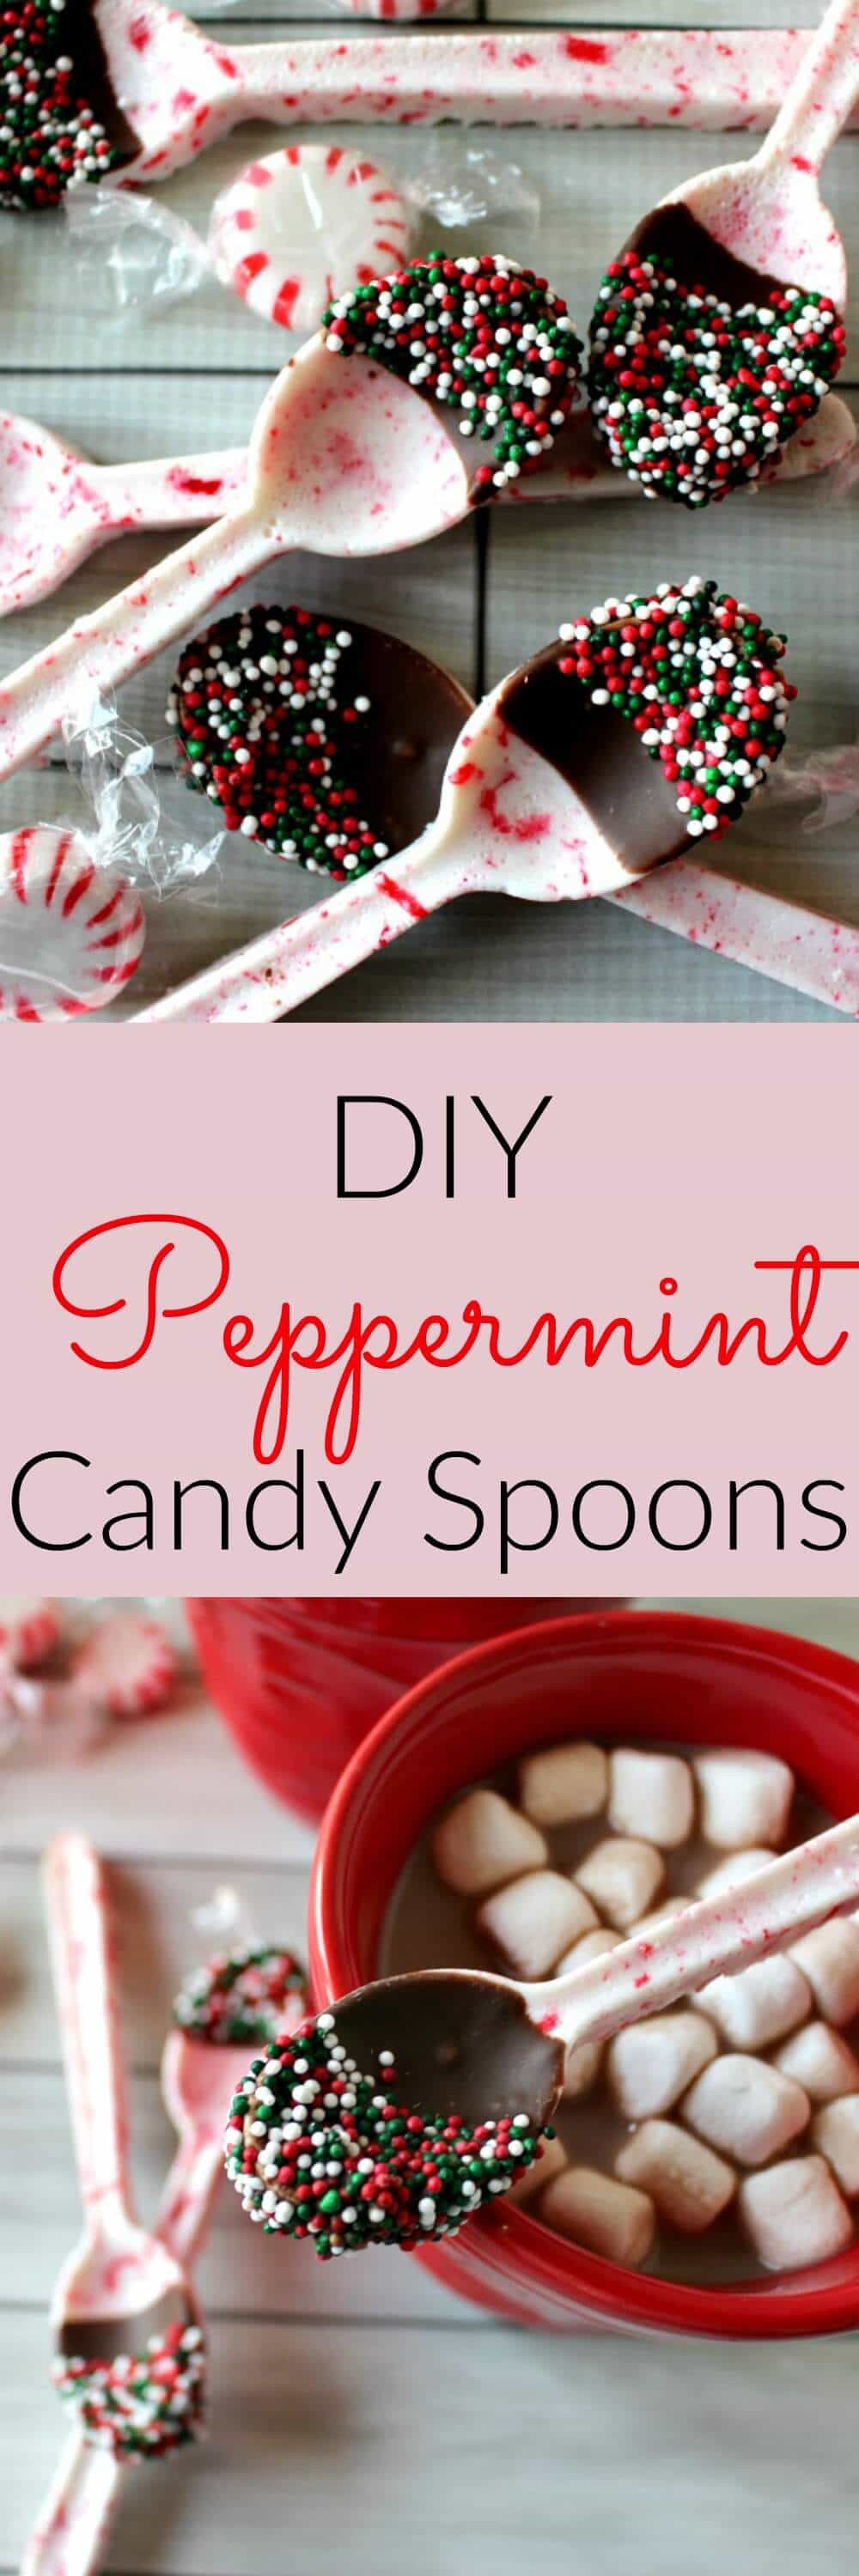 DIY Easy Christmas Gifts
 DIY Peppermint Candy Spoons Princess Pinky Girl